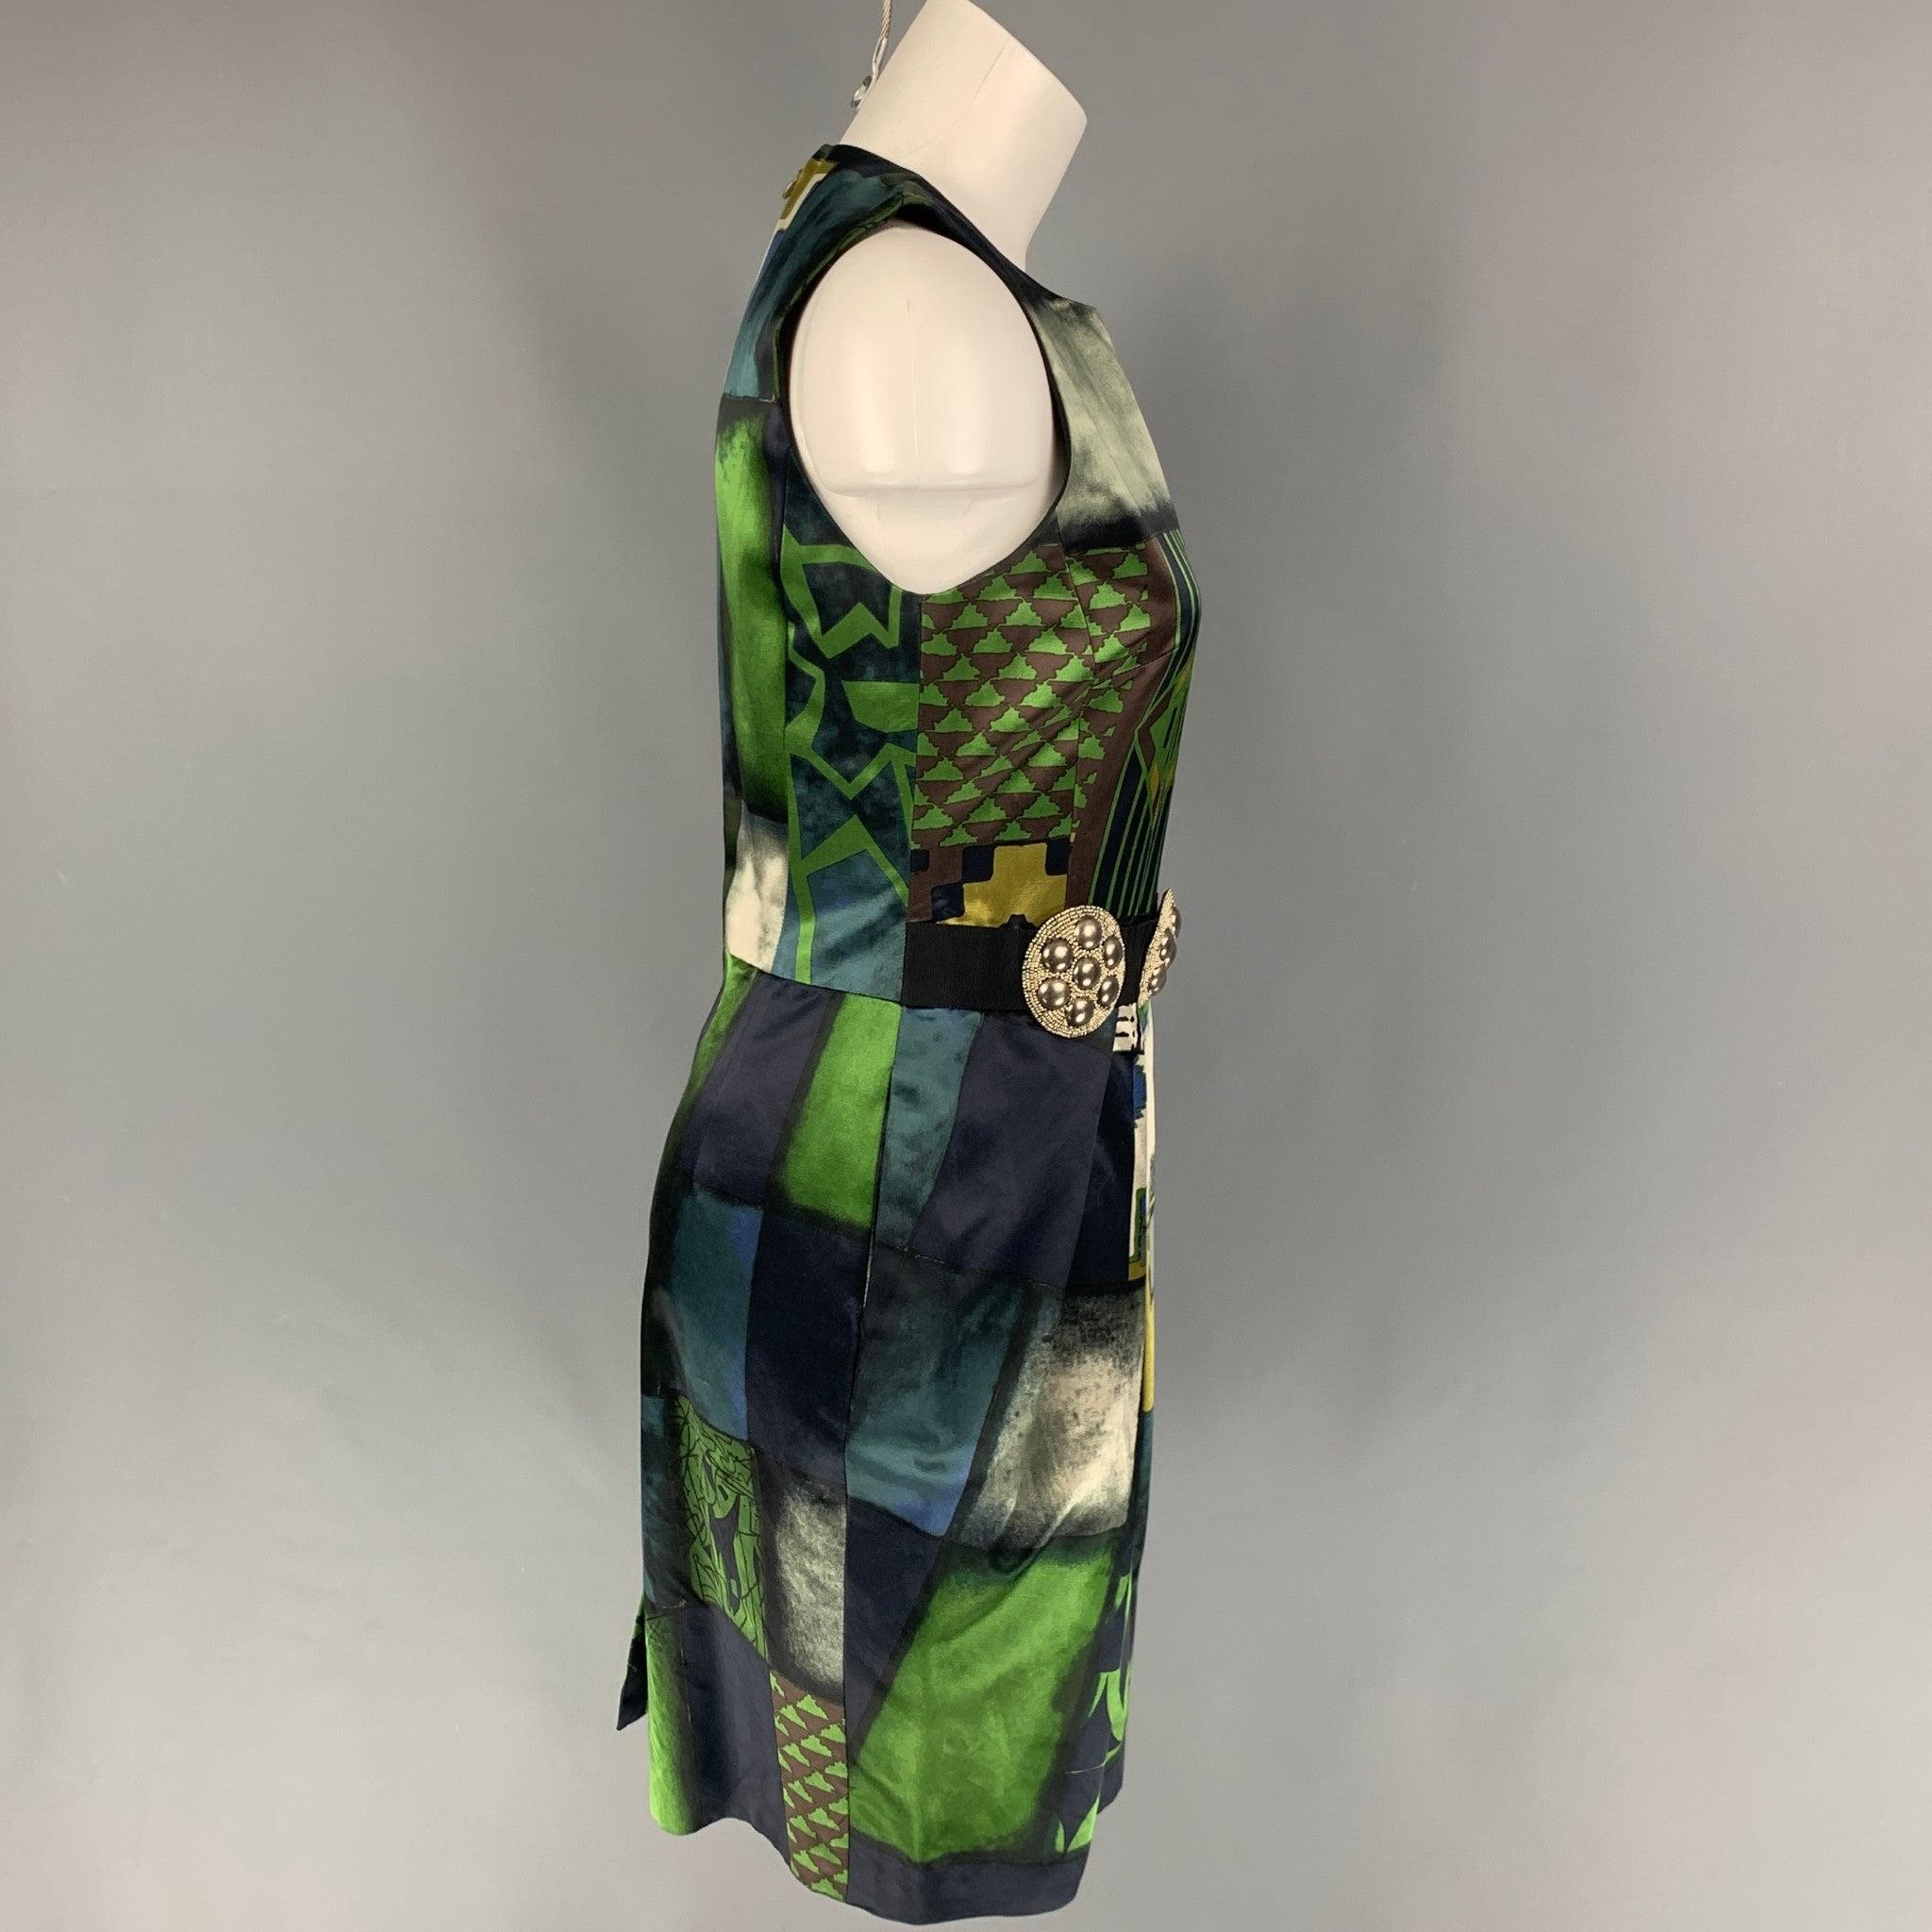 ETRO dress comes in a green & black abstract cotton / viscose featuring a sheath style, sleeveless, studded ribbon detail, slit pockets, and a back zip up closure. Made in Italy.
Very Good
Pre-Owned Condition. 

Marked:   42 

Measurements: 
